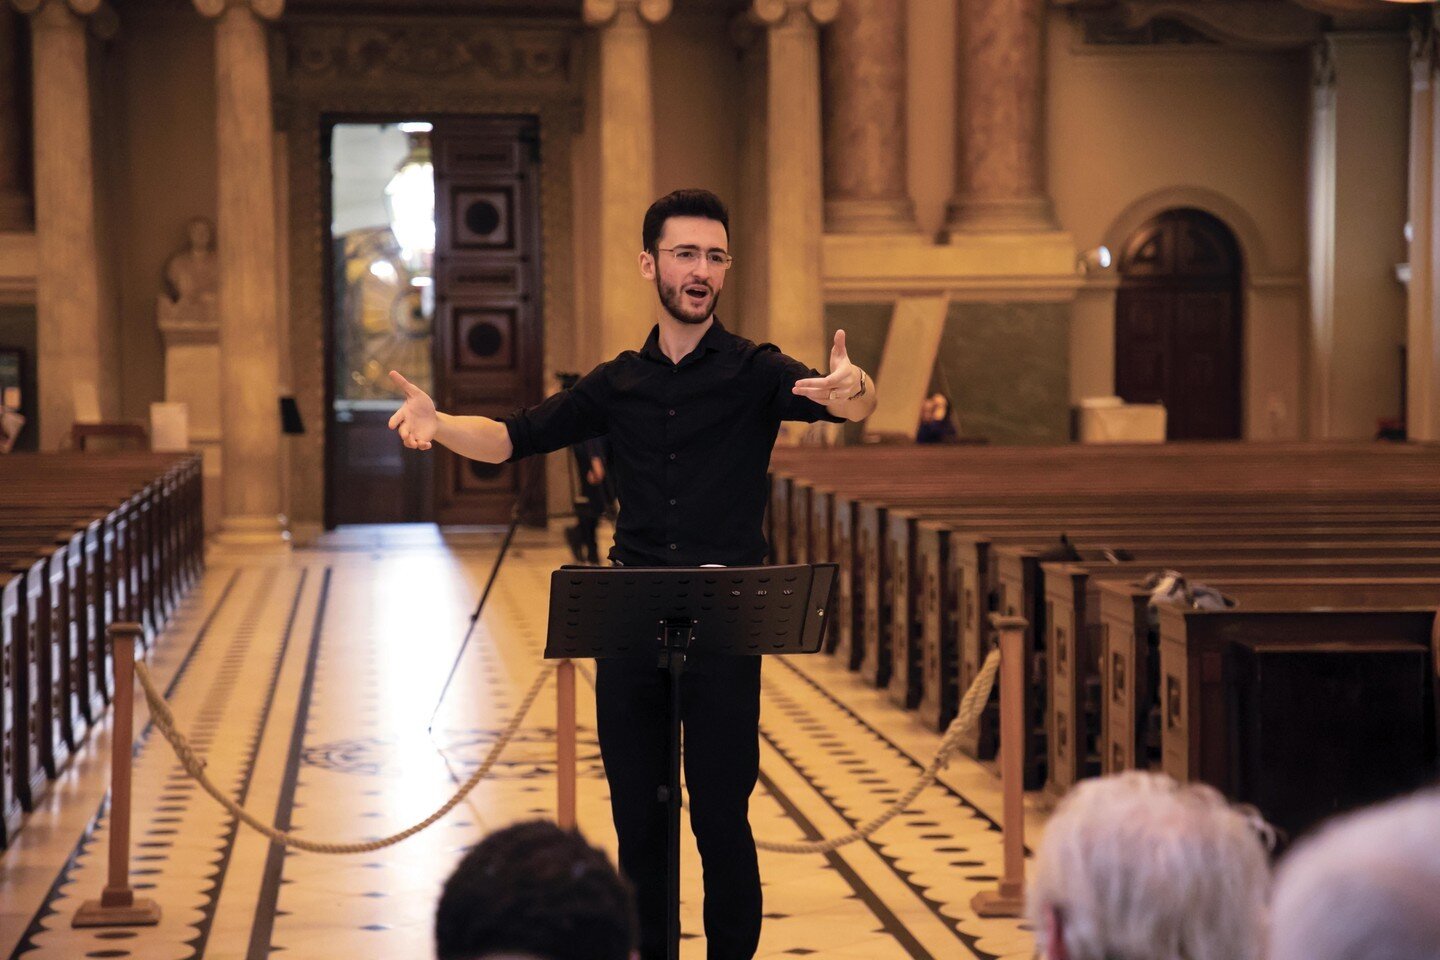 Did you know our next concert features two conductors? Jonathan Schranz is directing the first half, with Founder Musical Director Mark Ford taking the Mozart!
Find out more about our upcoming concert with @SouthbankSinfonia at @StJohnsSmithSquare by